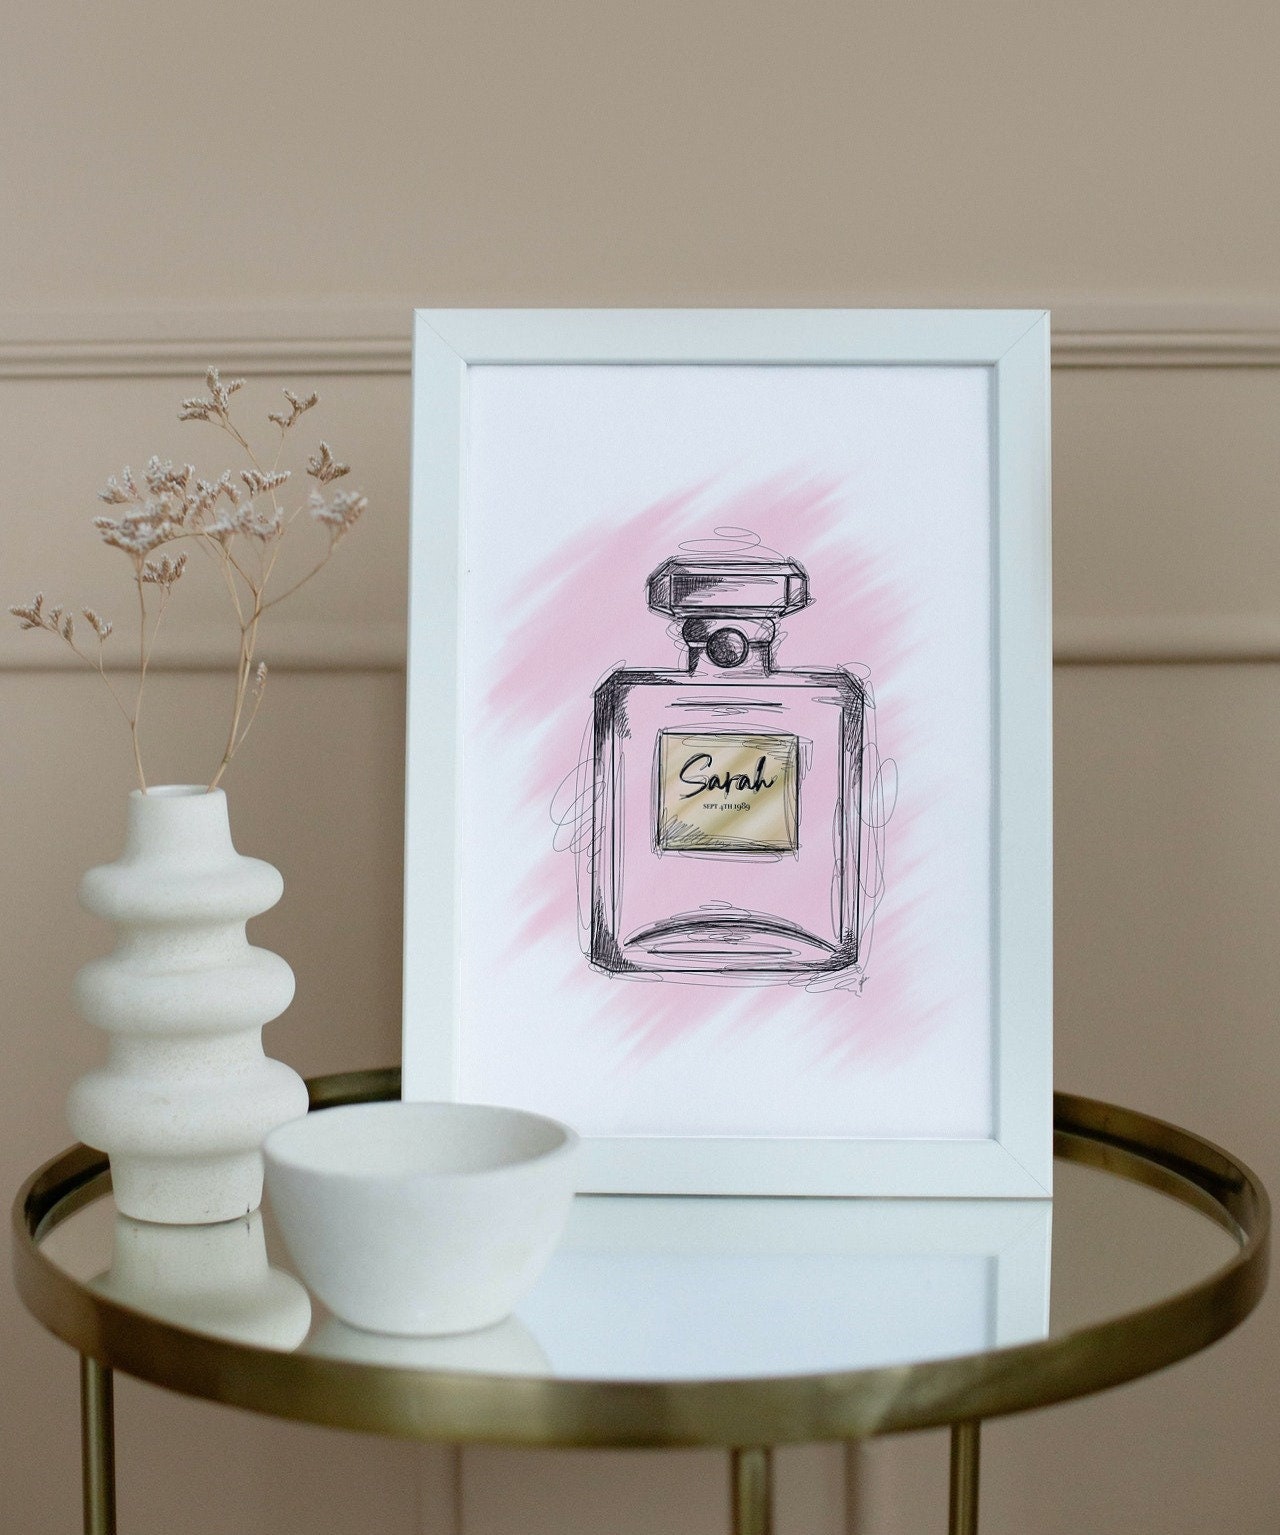 coco chanel perfume pink bottle